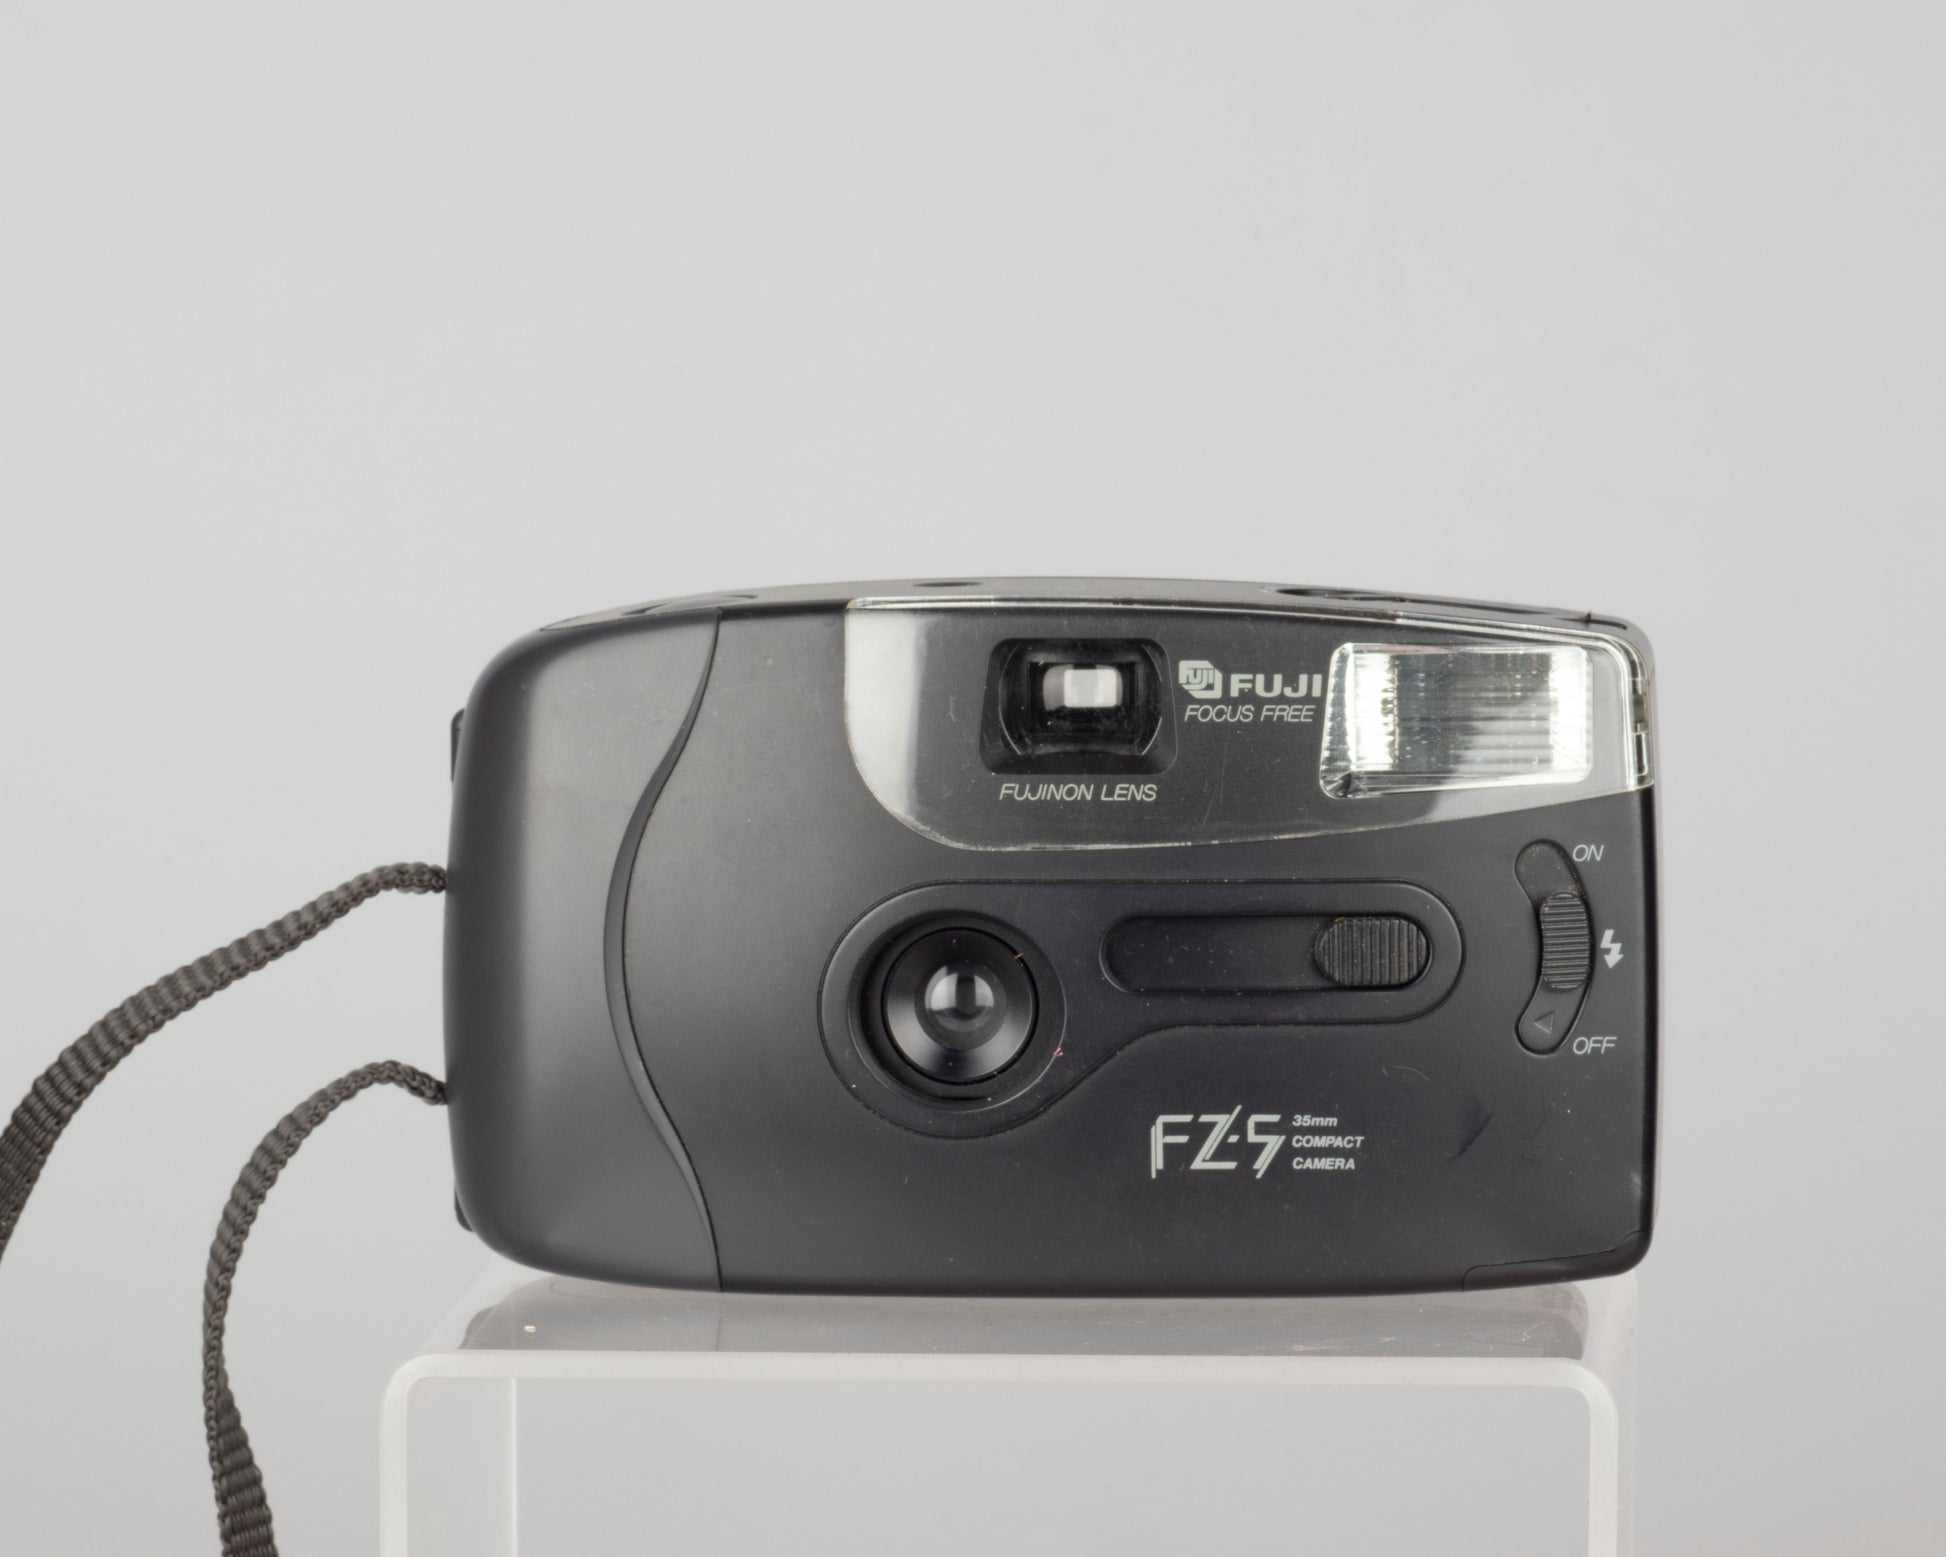 The Fujifilm FZ-5 is a simple mechanical 35mm film camera with a built-in flash